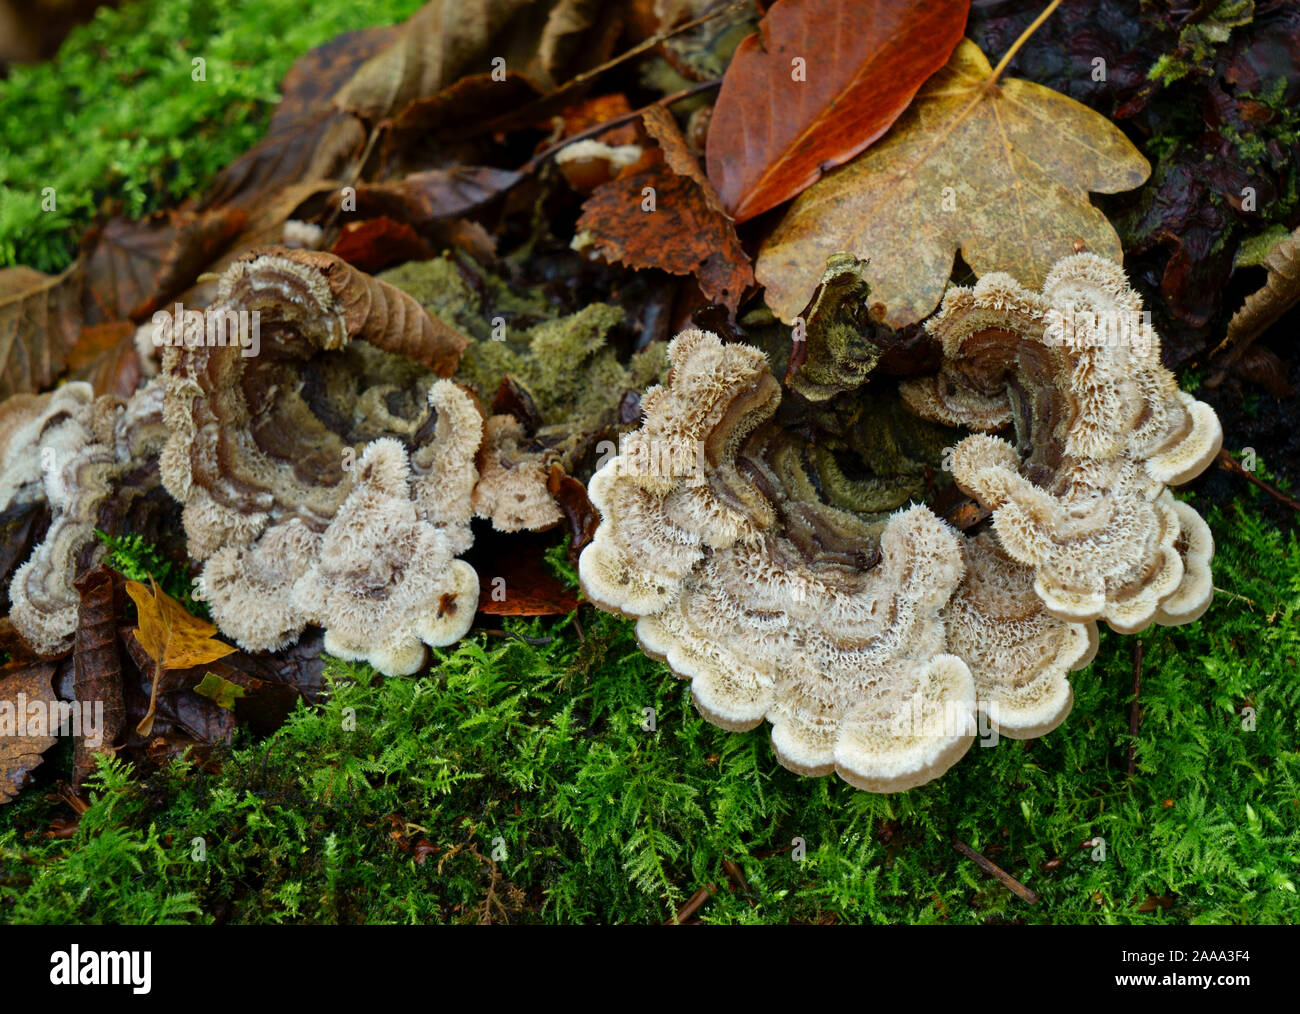 Fungi growing on a rotten log. Stock Photo